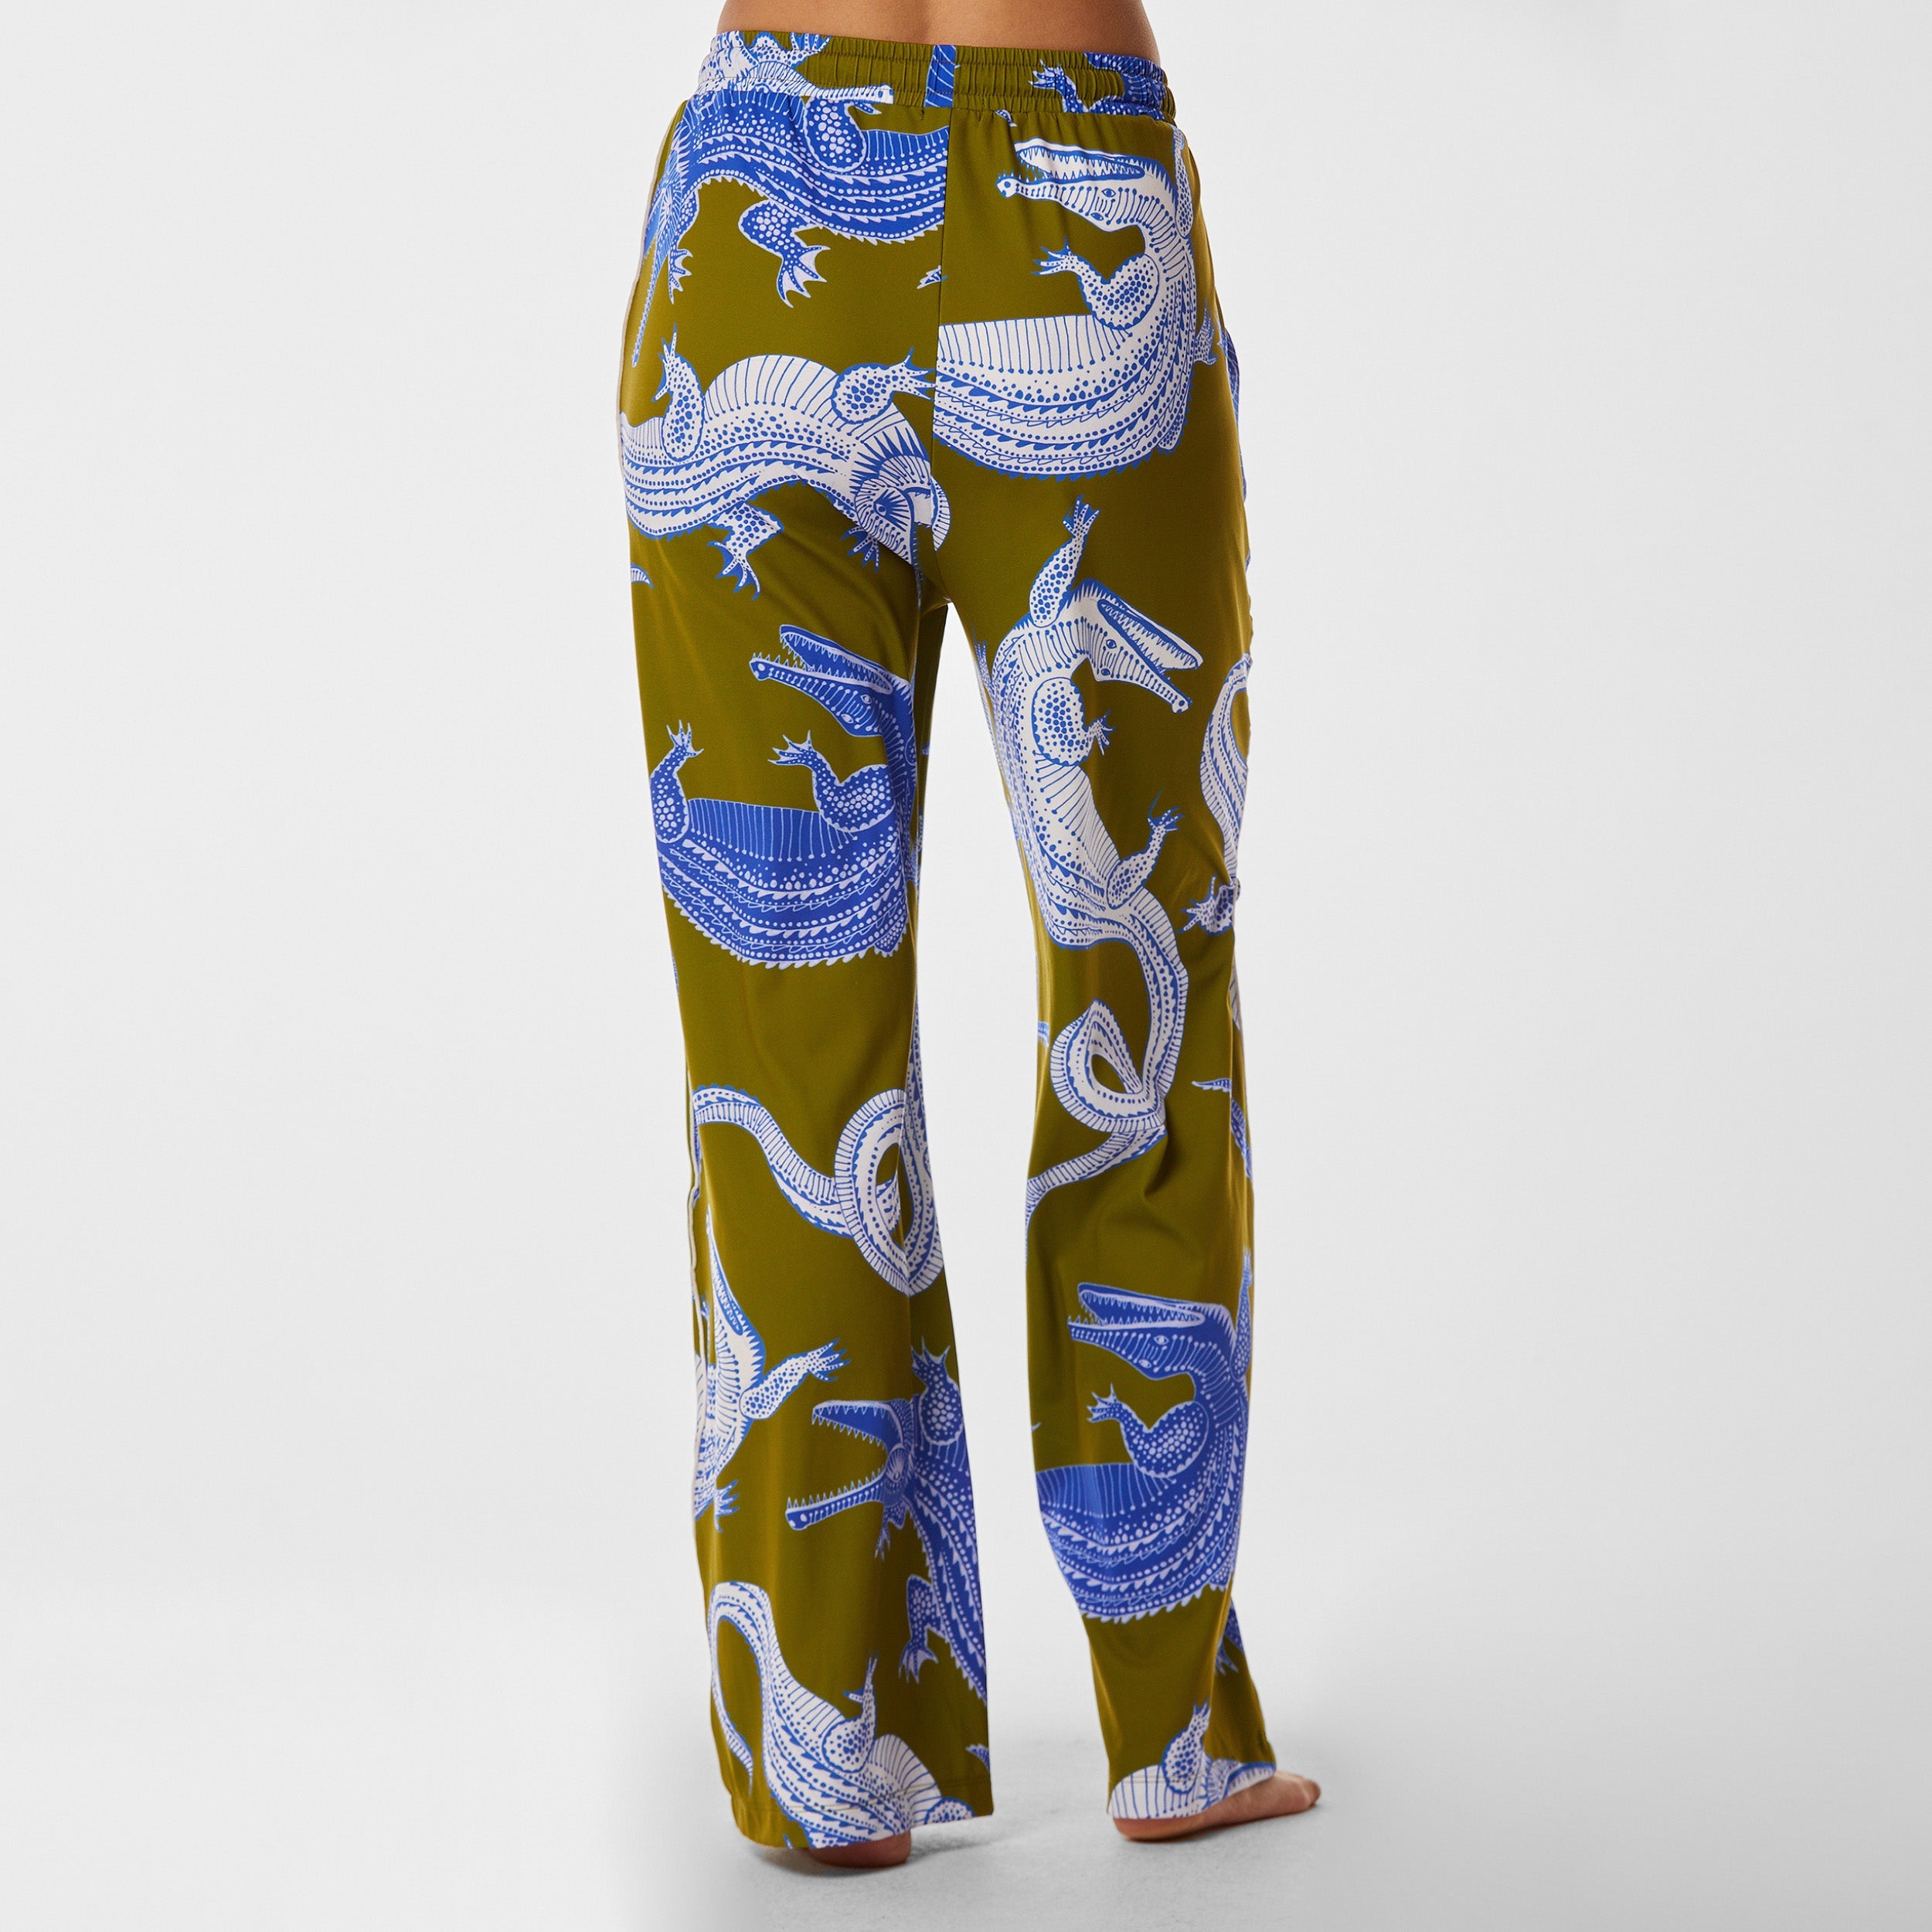 Rear view of woman wearing breathable, relaxed and buttery smooth pajama pant featuring high-waist cut, side pockets, front tie and stunning Nile gator print.